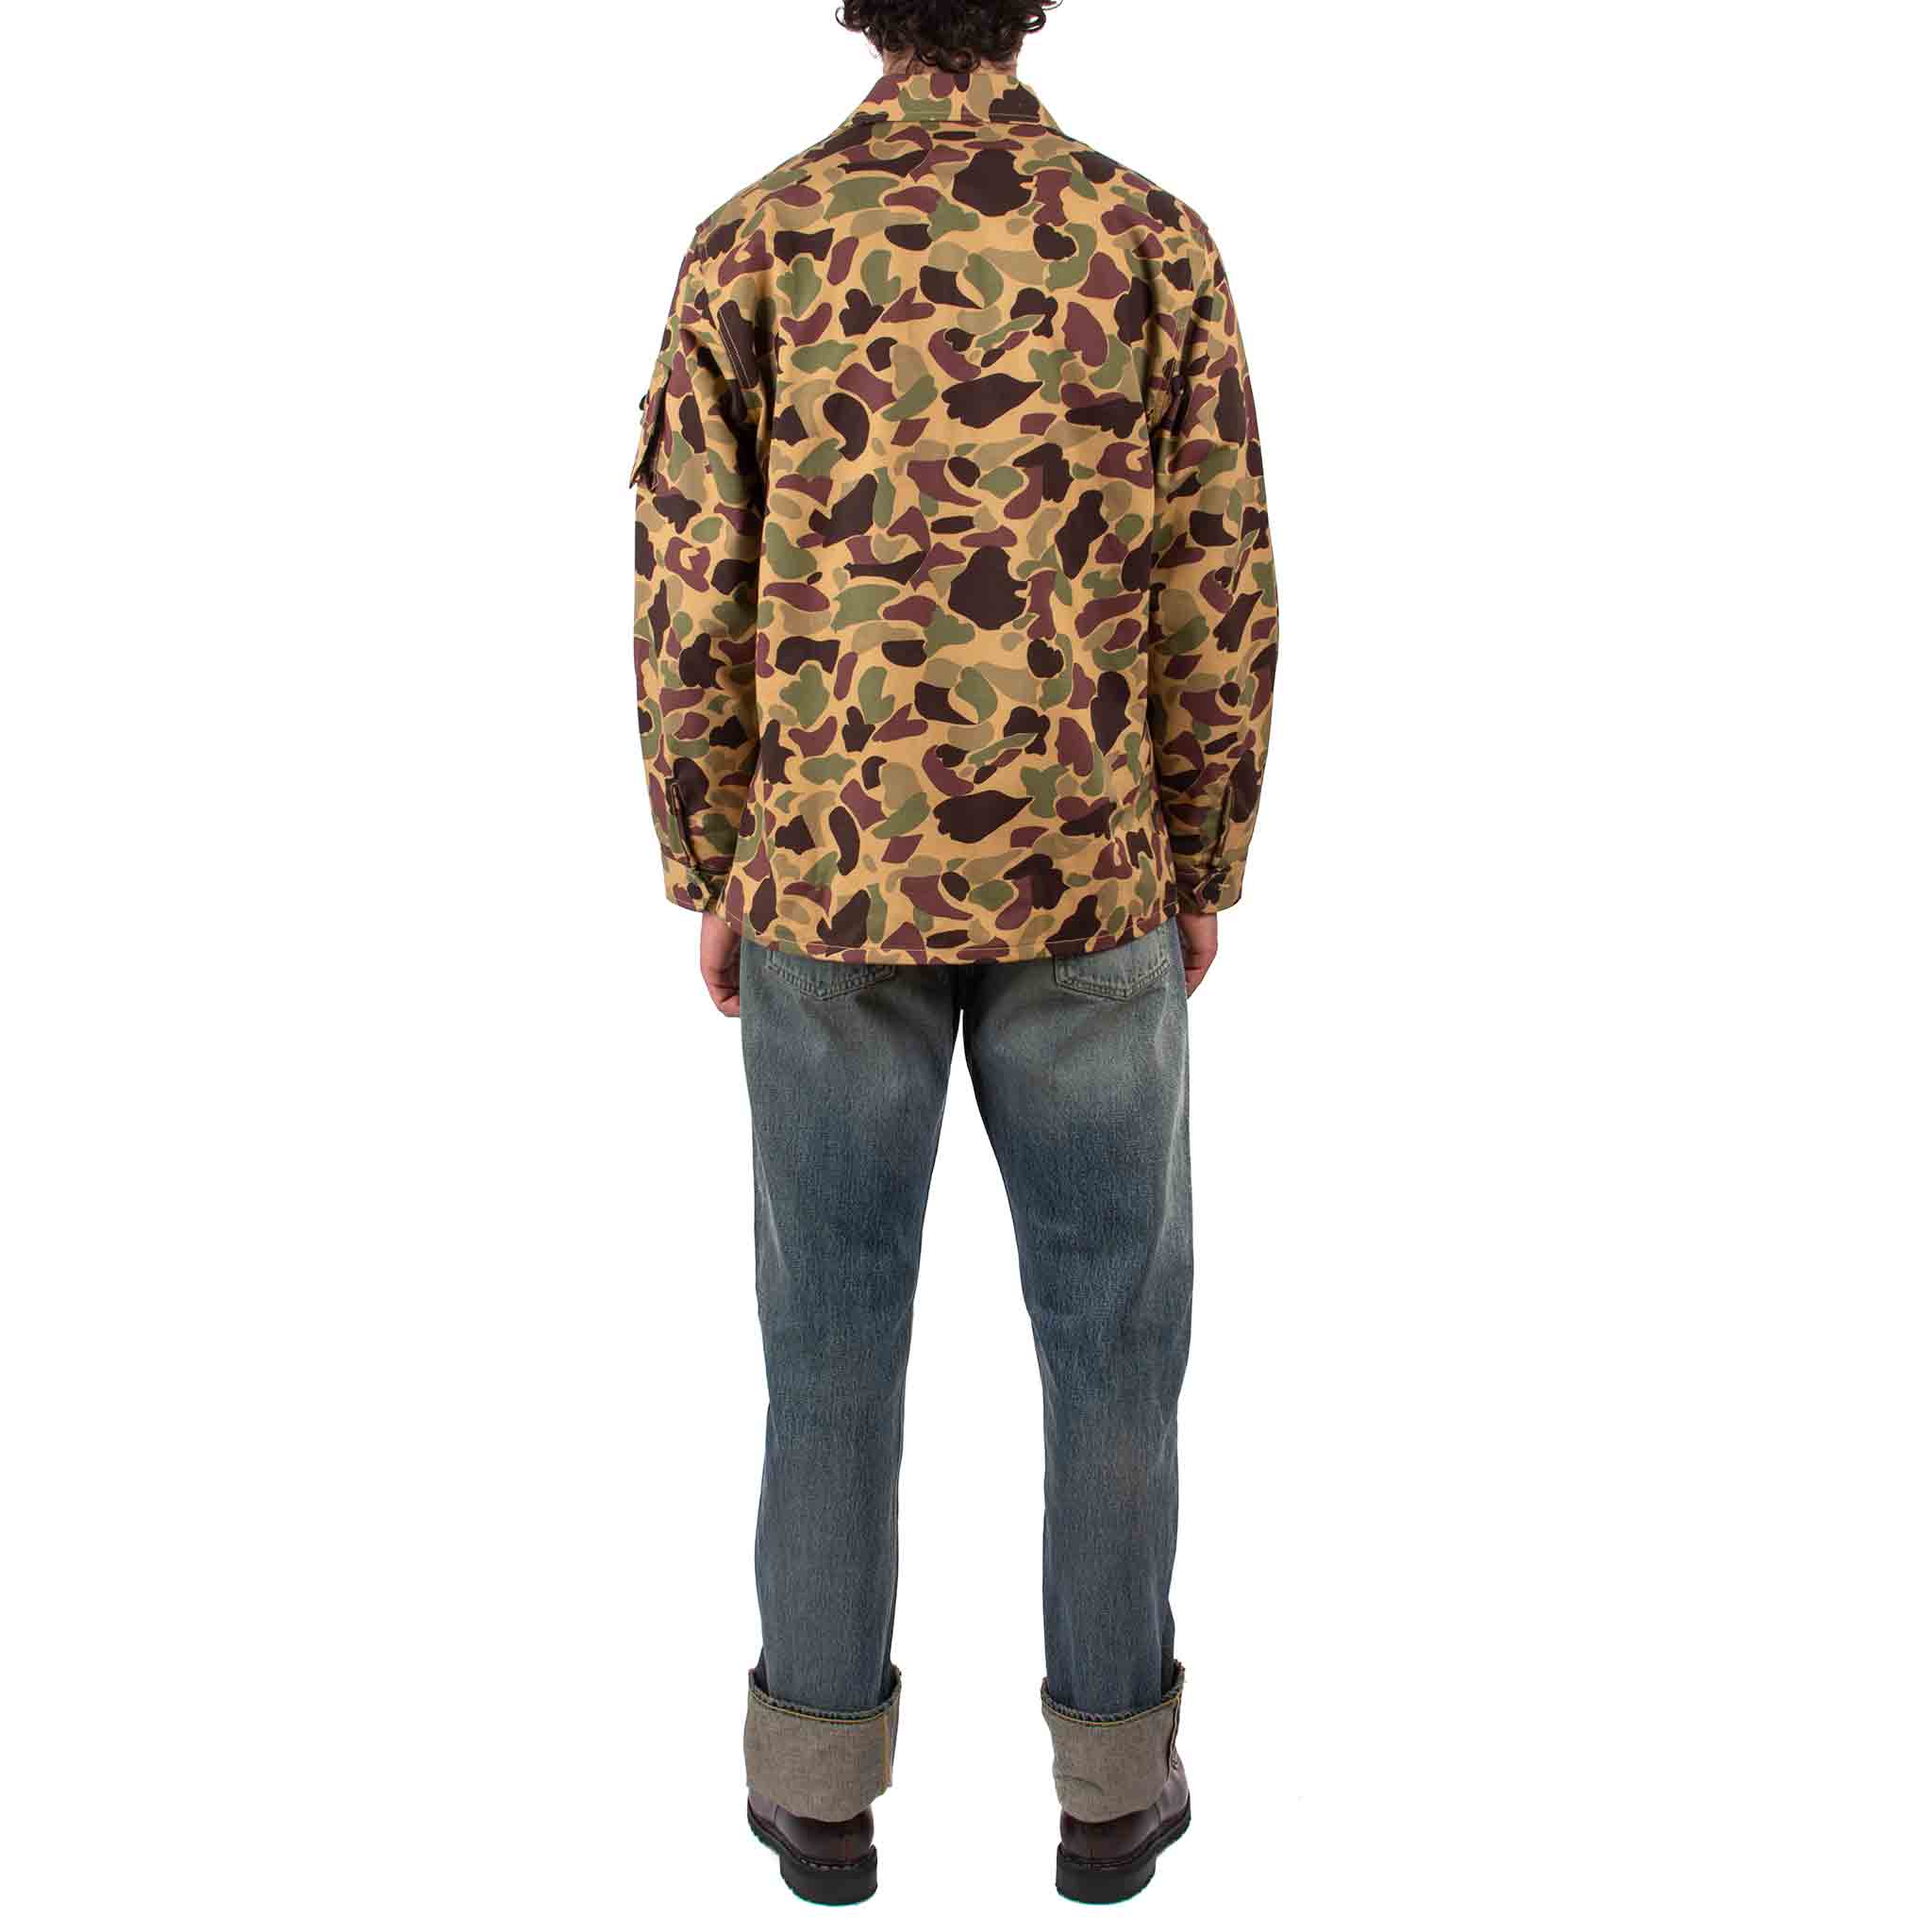 The Real McCoy's MJ21013 Beo Gam Camouflage Shirt Beige Back